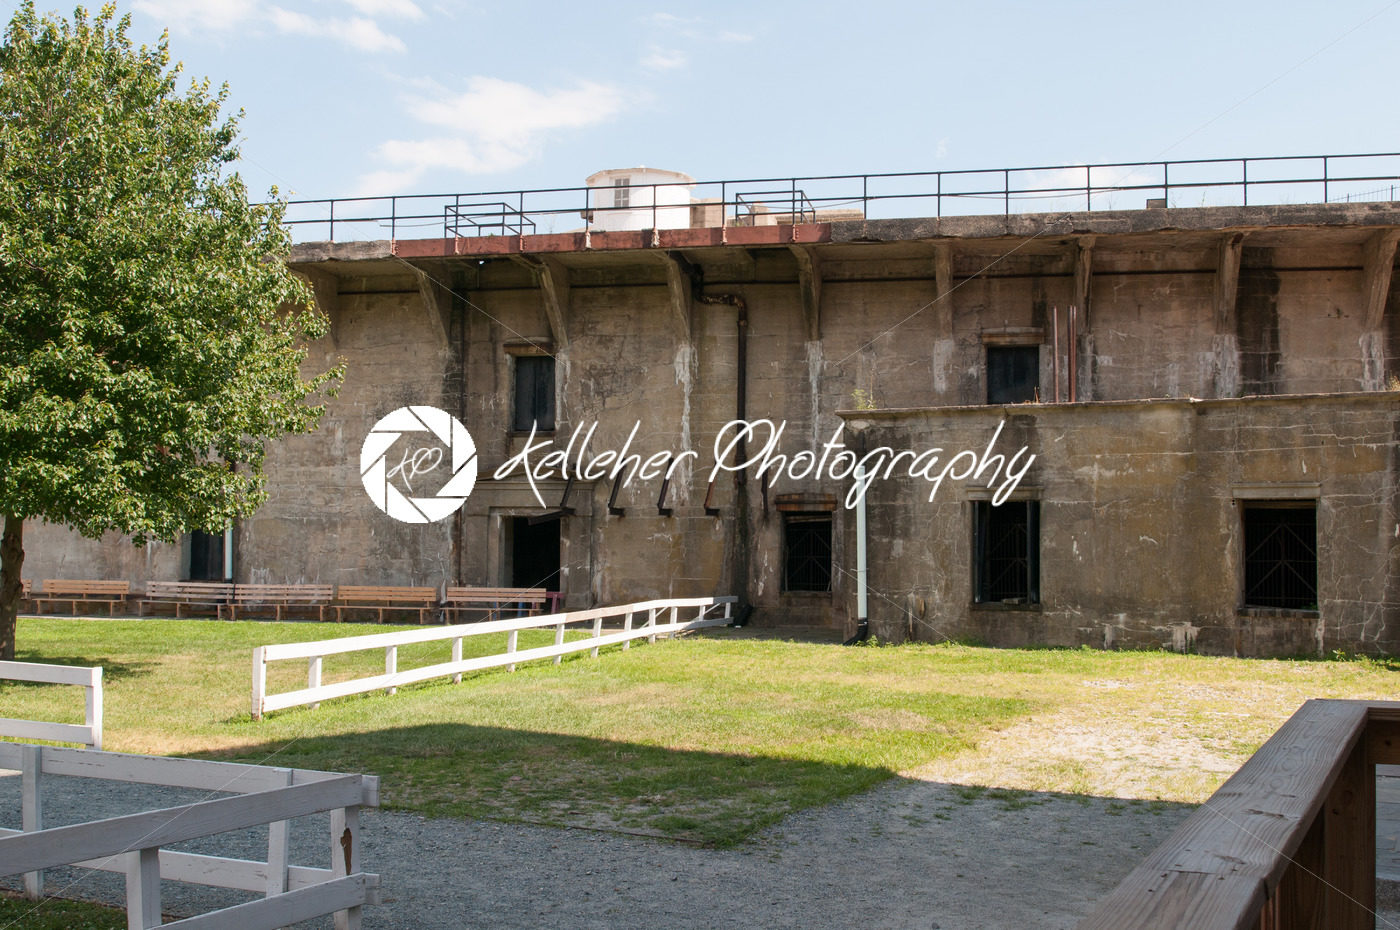 FORT DELAWARE, DELAWARE CITY, DE – AUGUST 1: Fort Delaware State Park, Historic Union Civil War Fortress that housed Confederate Prisoners on August 1, 2015 - Kelleher Photography Store